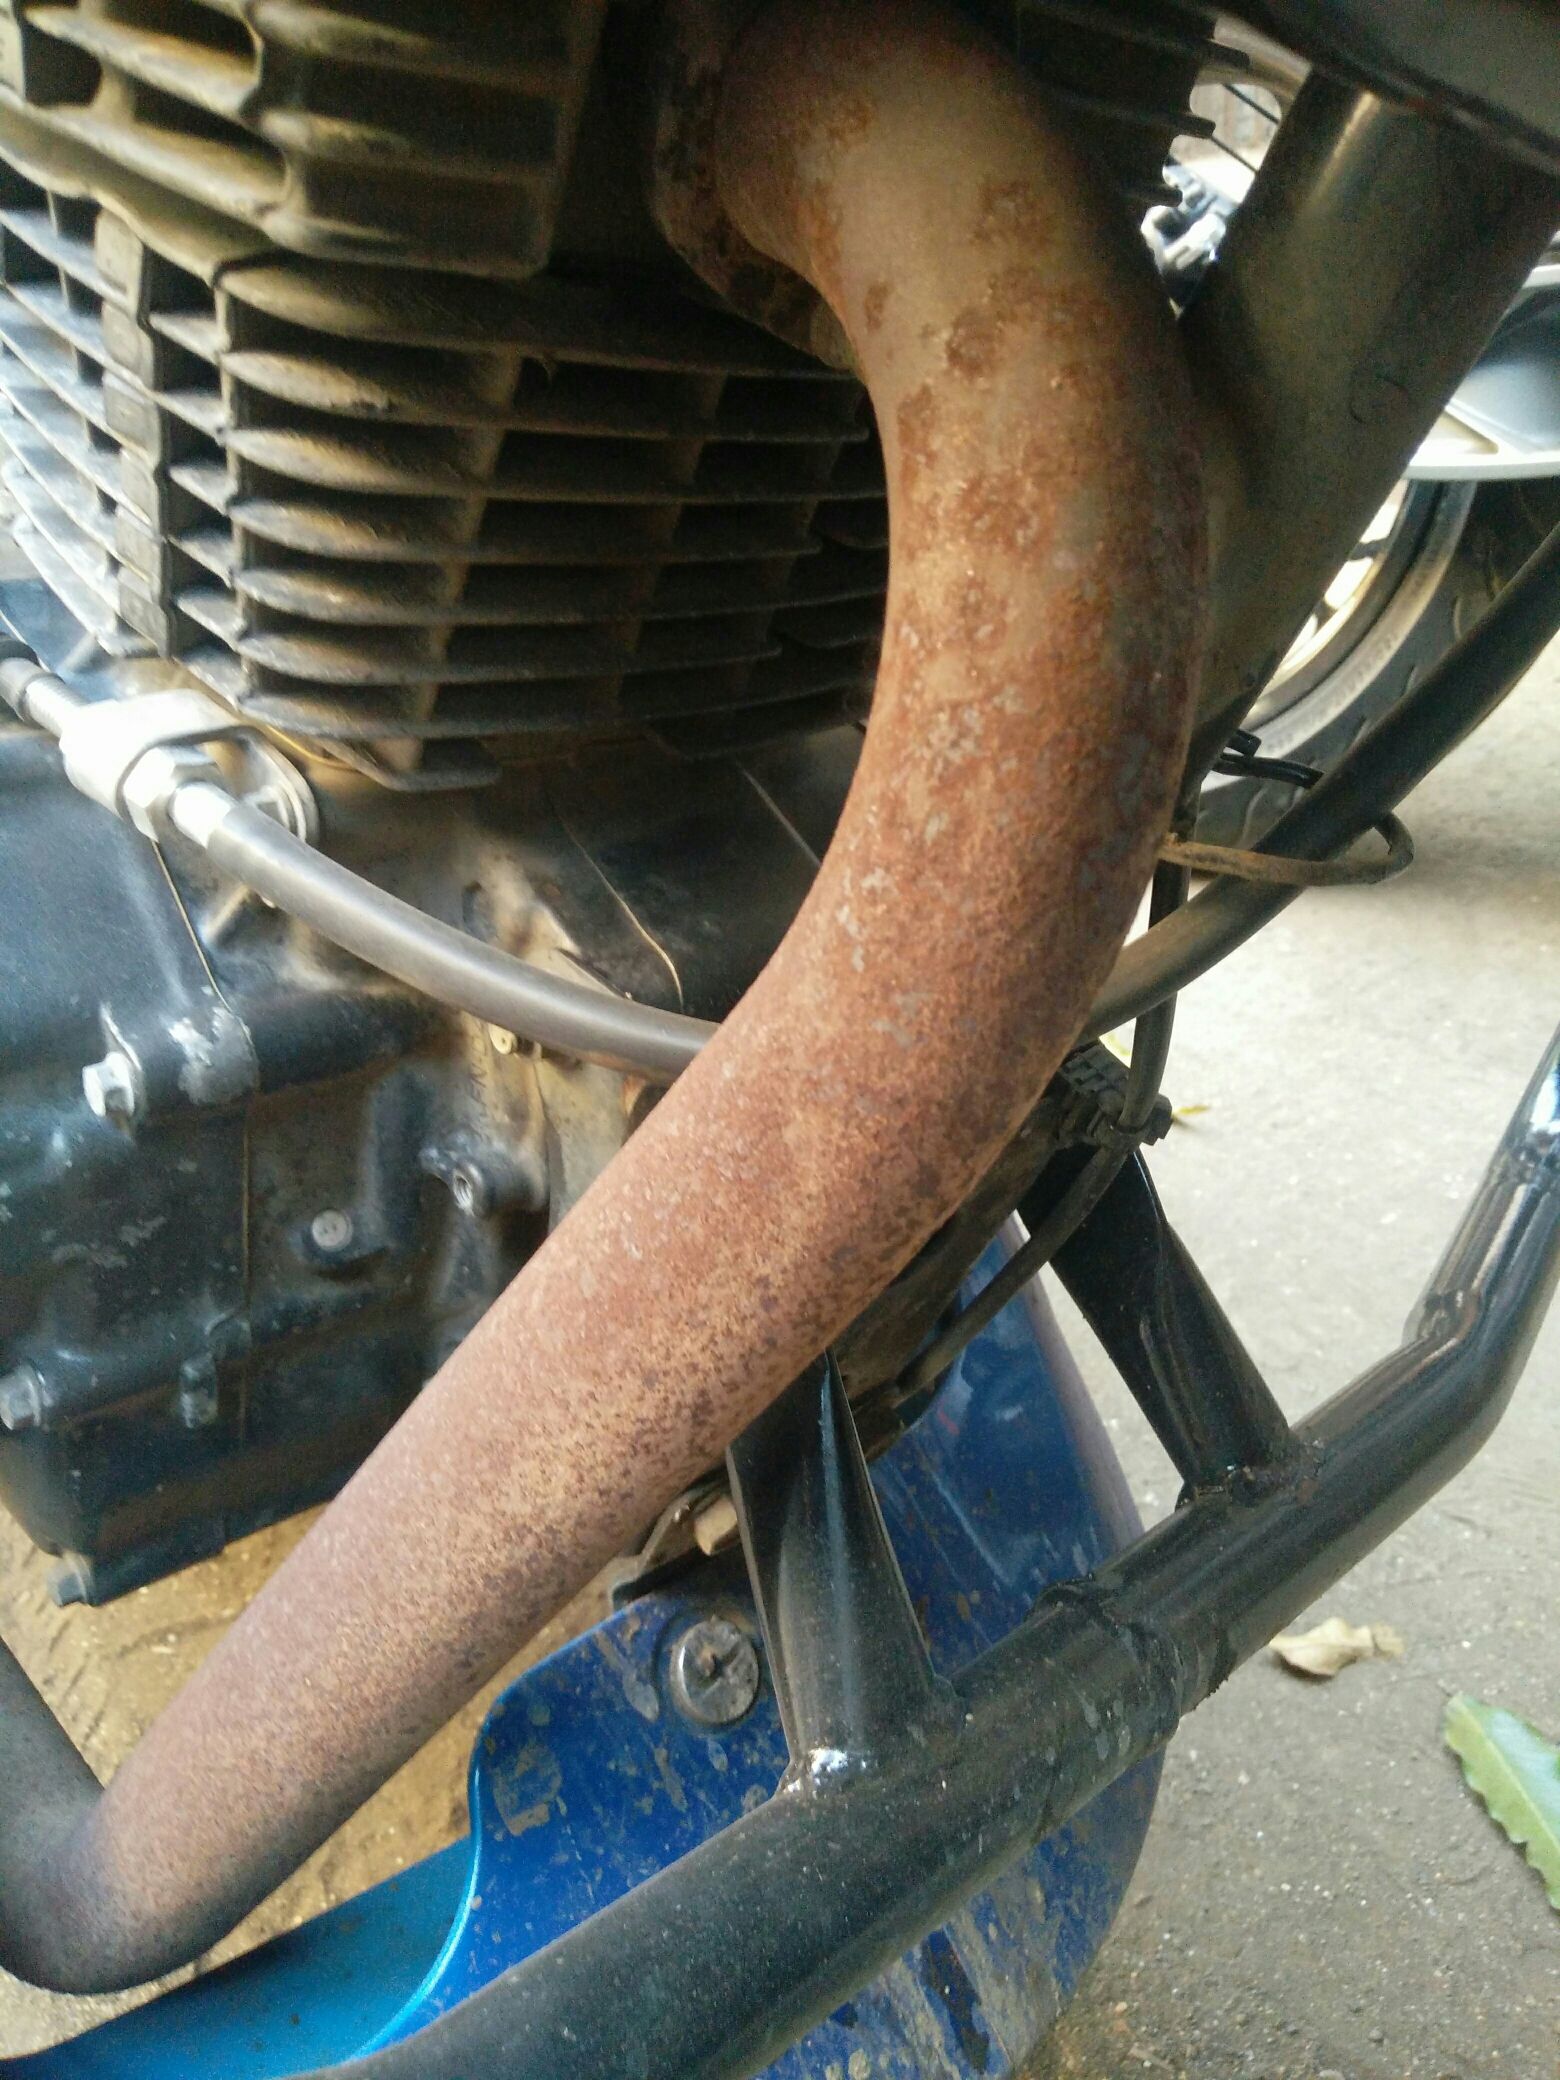 Exhaust rust removal and coating